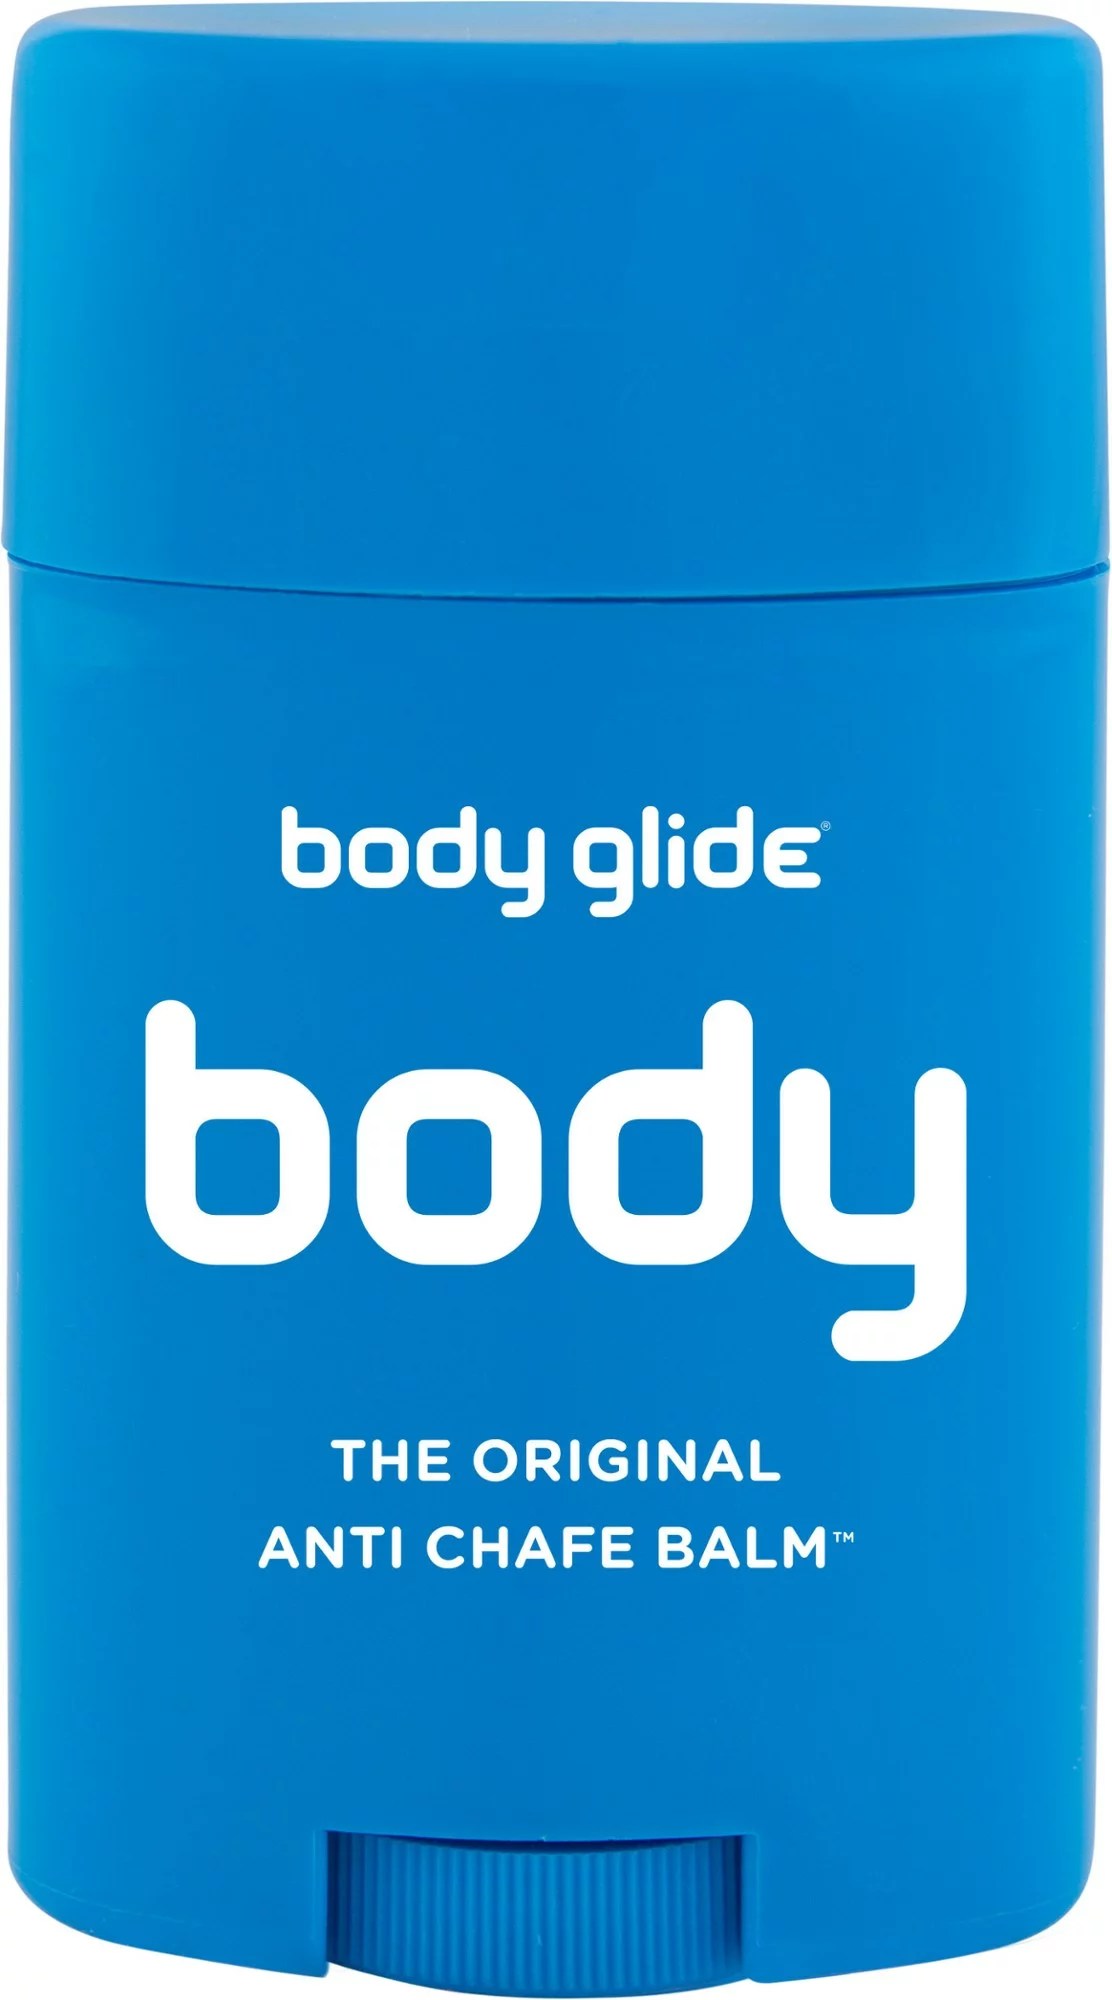 body glide, one of the best things you can buy from REI according to experts